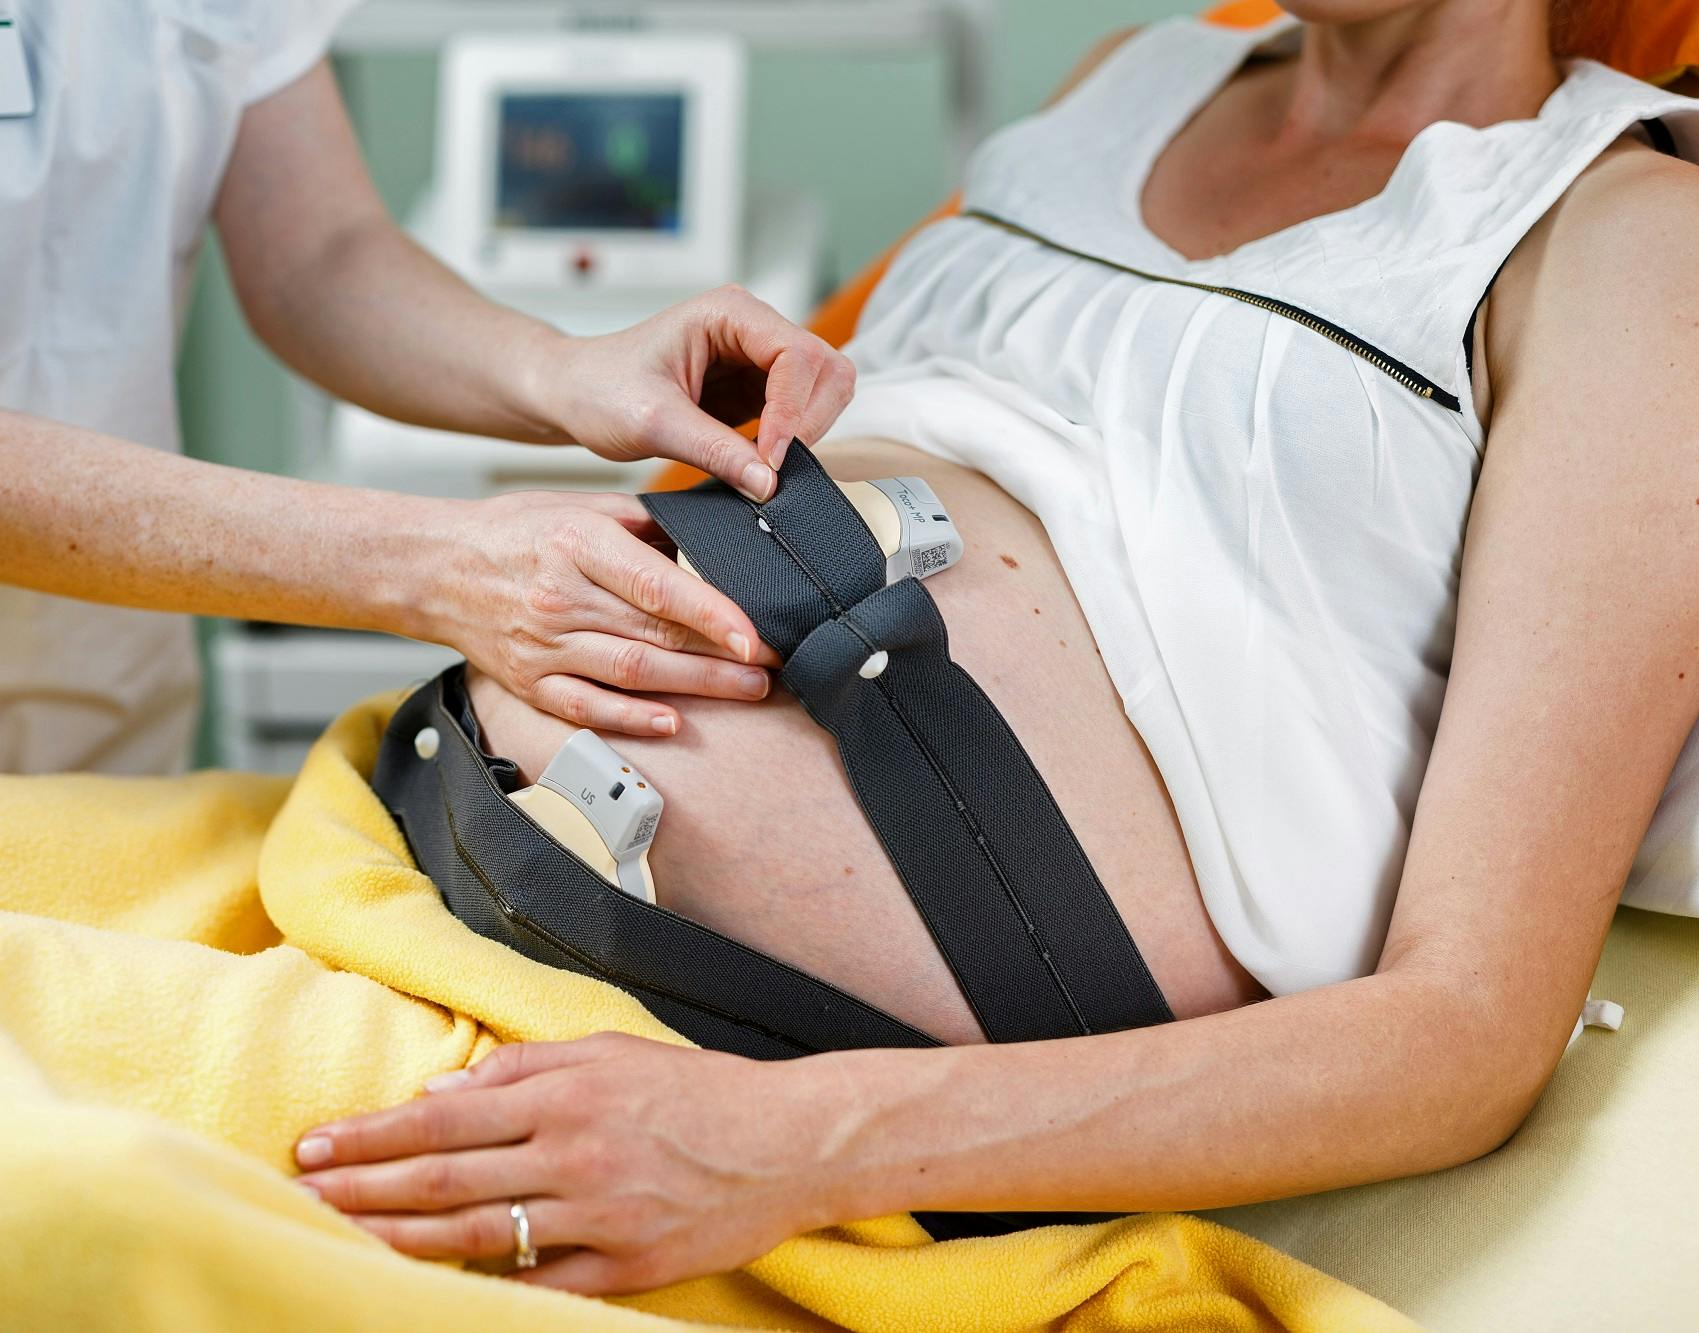 Pregnant woman with CTG belts for monitoring the foetal heart rate in hospital.